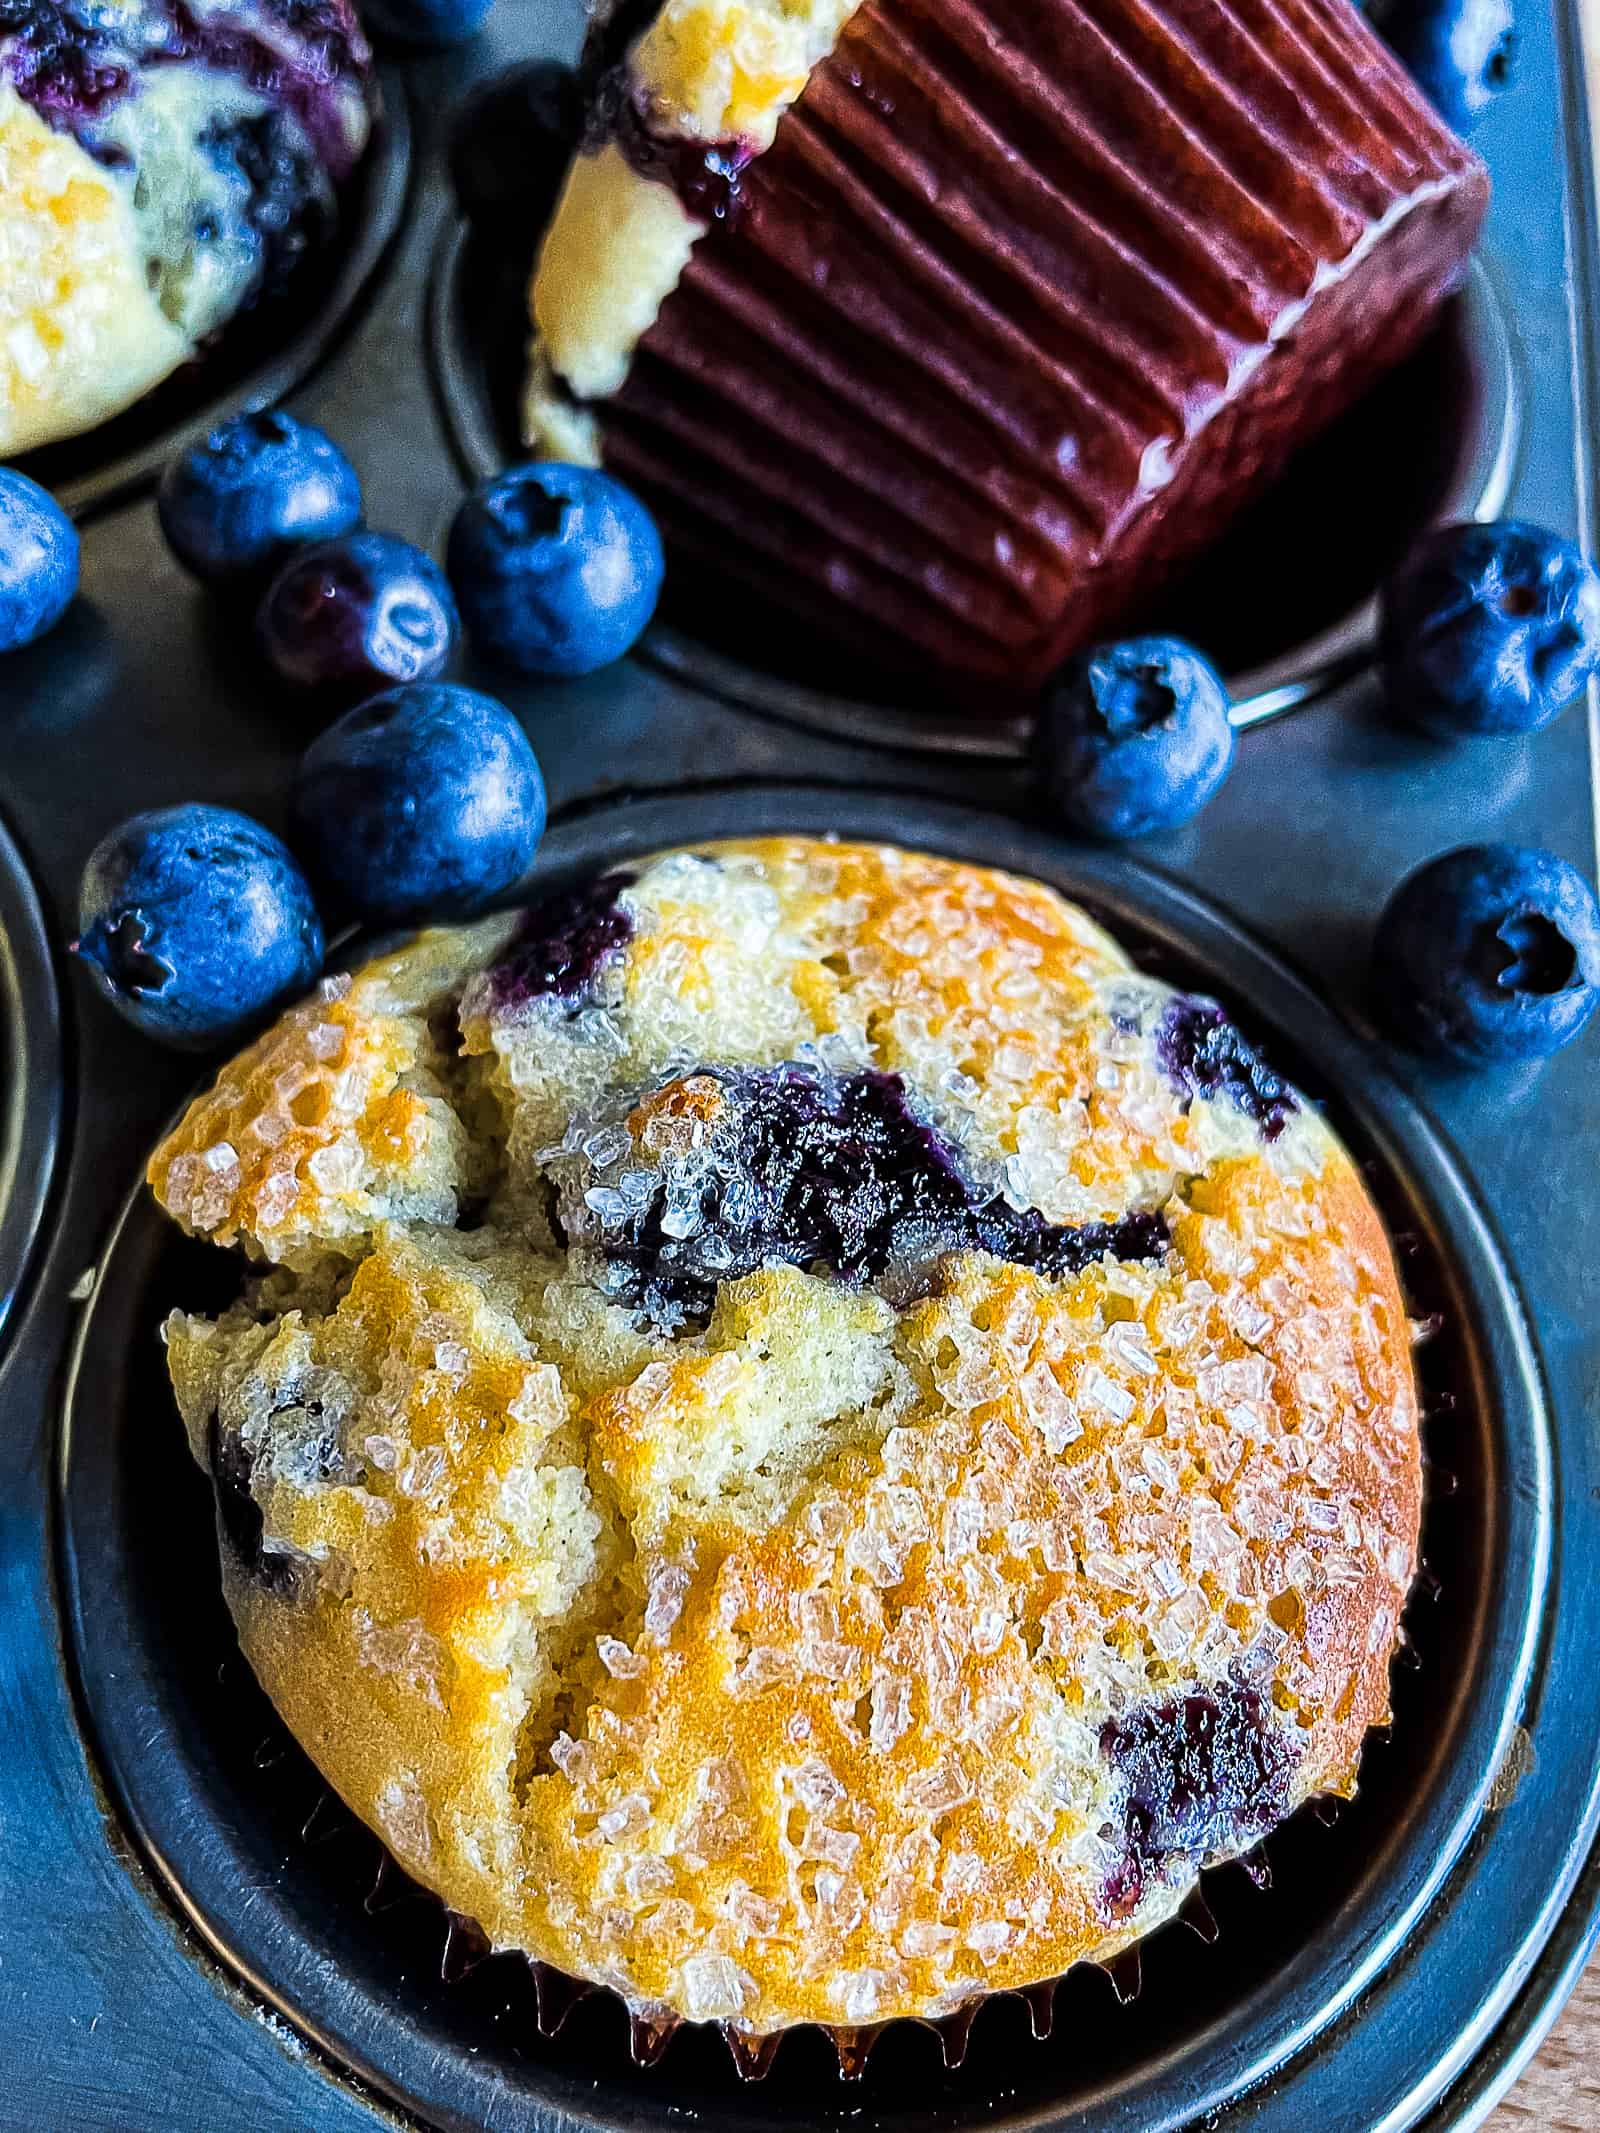 Baked blueberry muffin in a pan. Fresh blueberries are scattered on the pan.